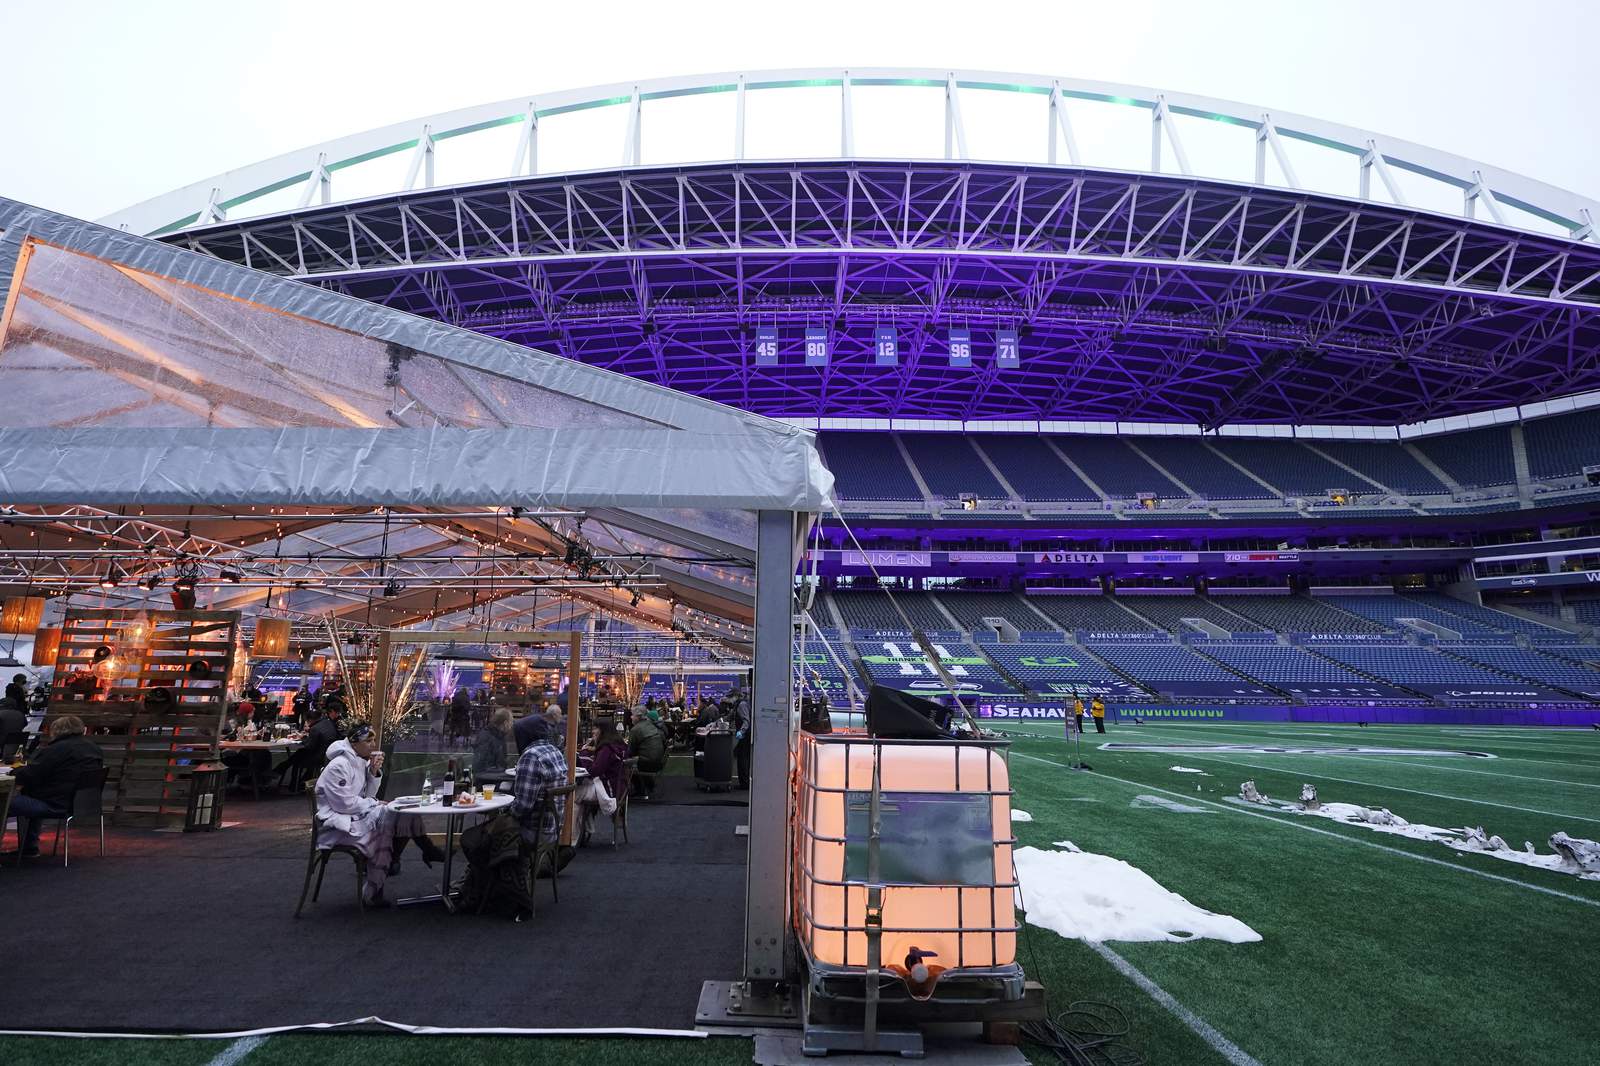 Seattle ups its outdoor dining game, Seahawks-style